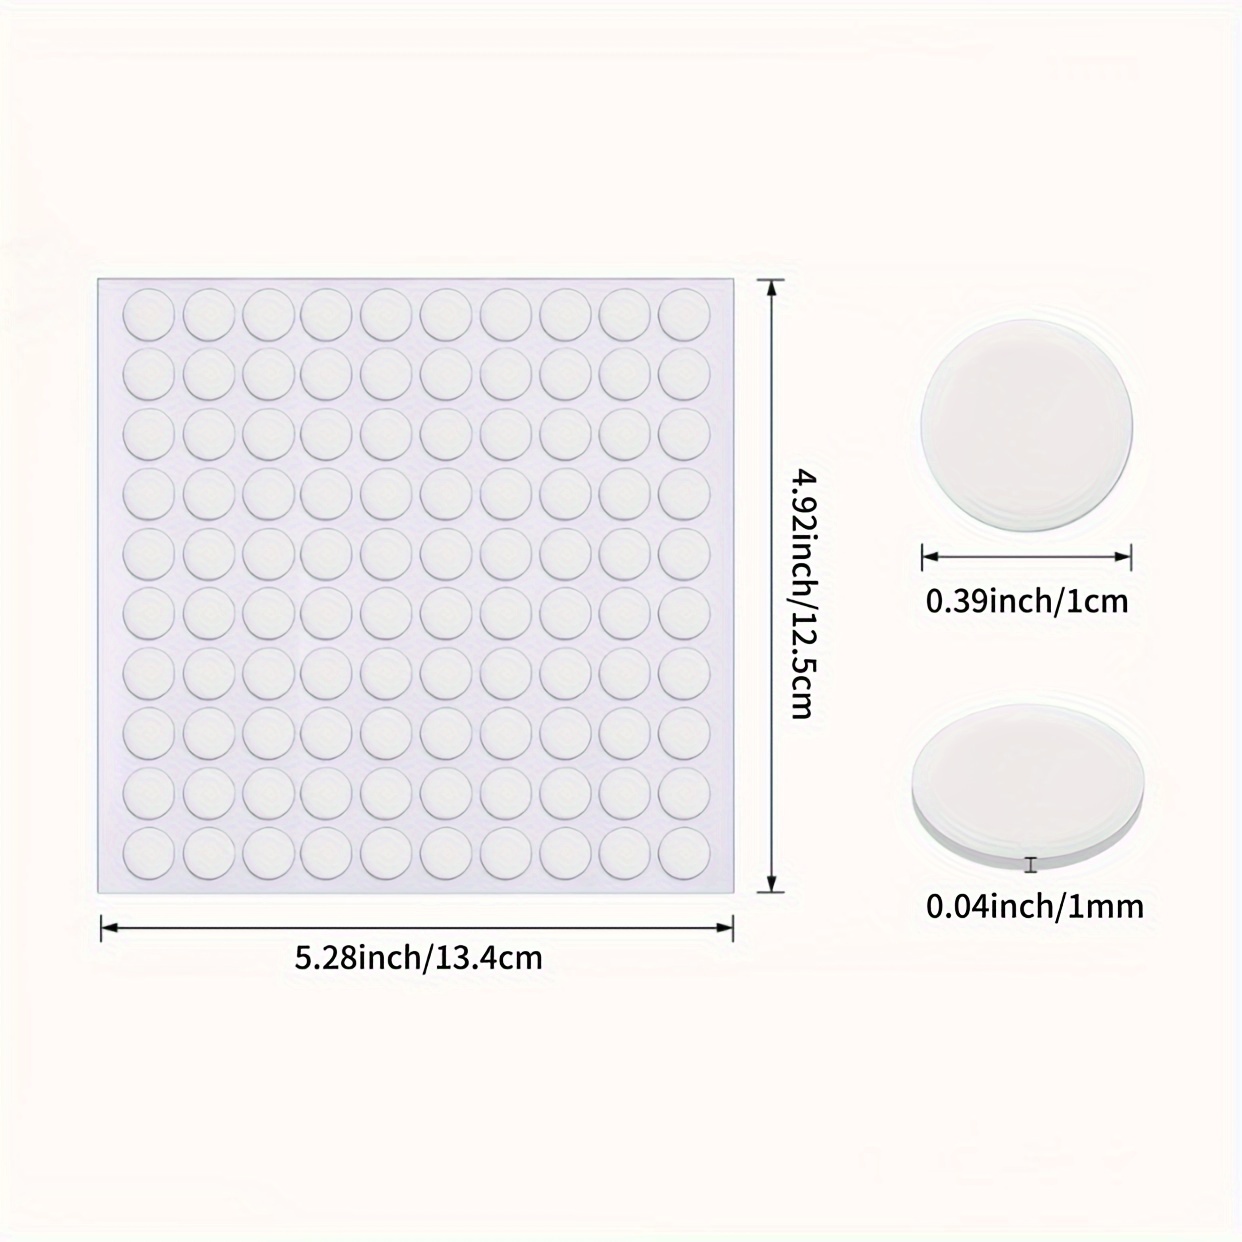 Large Double Sided Sticky Dots 200PCs - Clear Round Pakistan